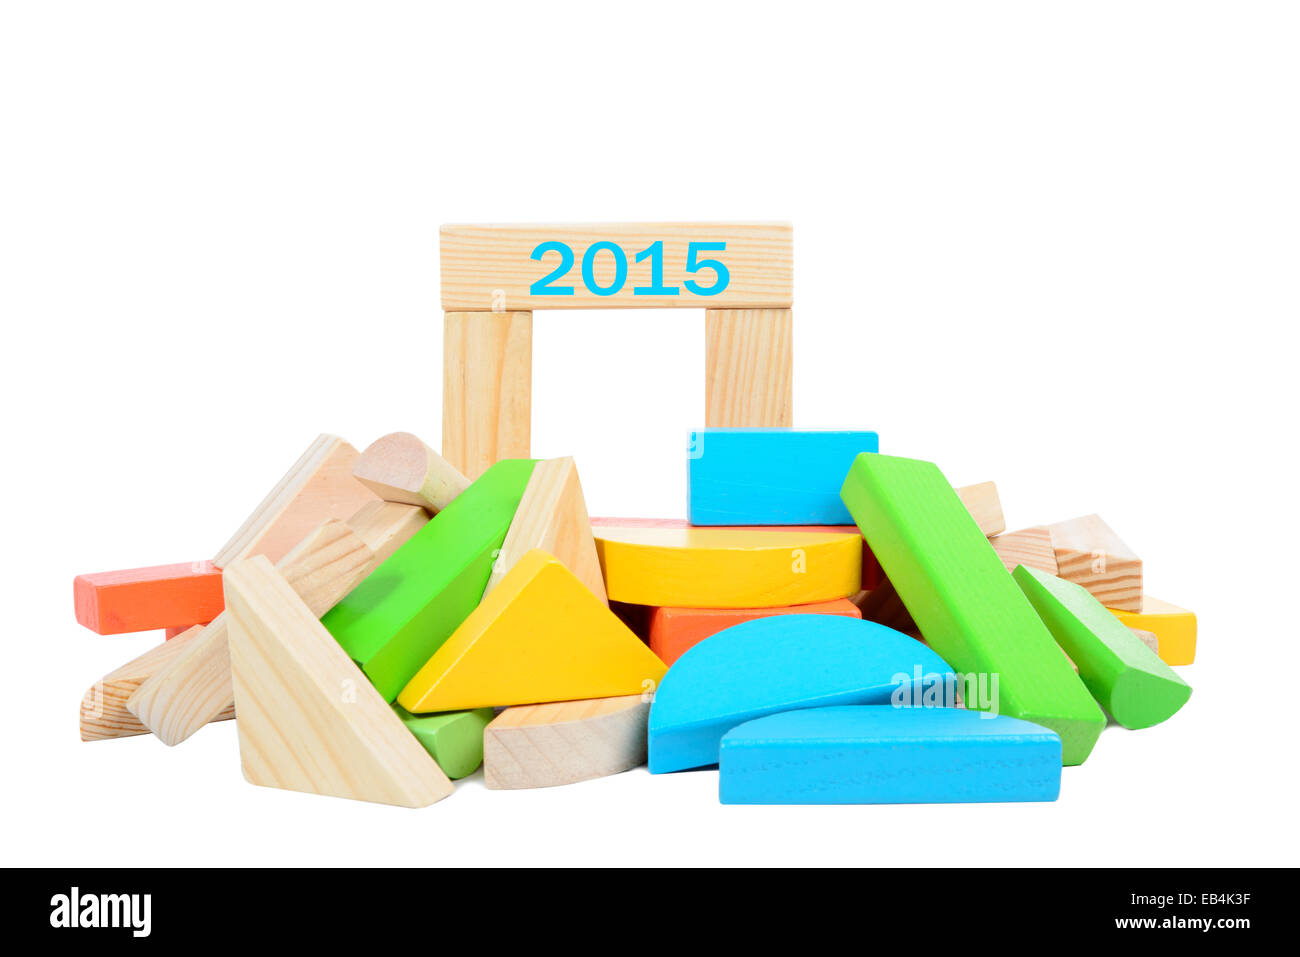 Wooden construction toy 2015 on white background Stock Photo